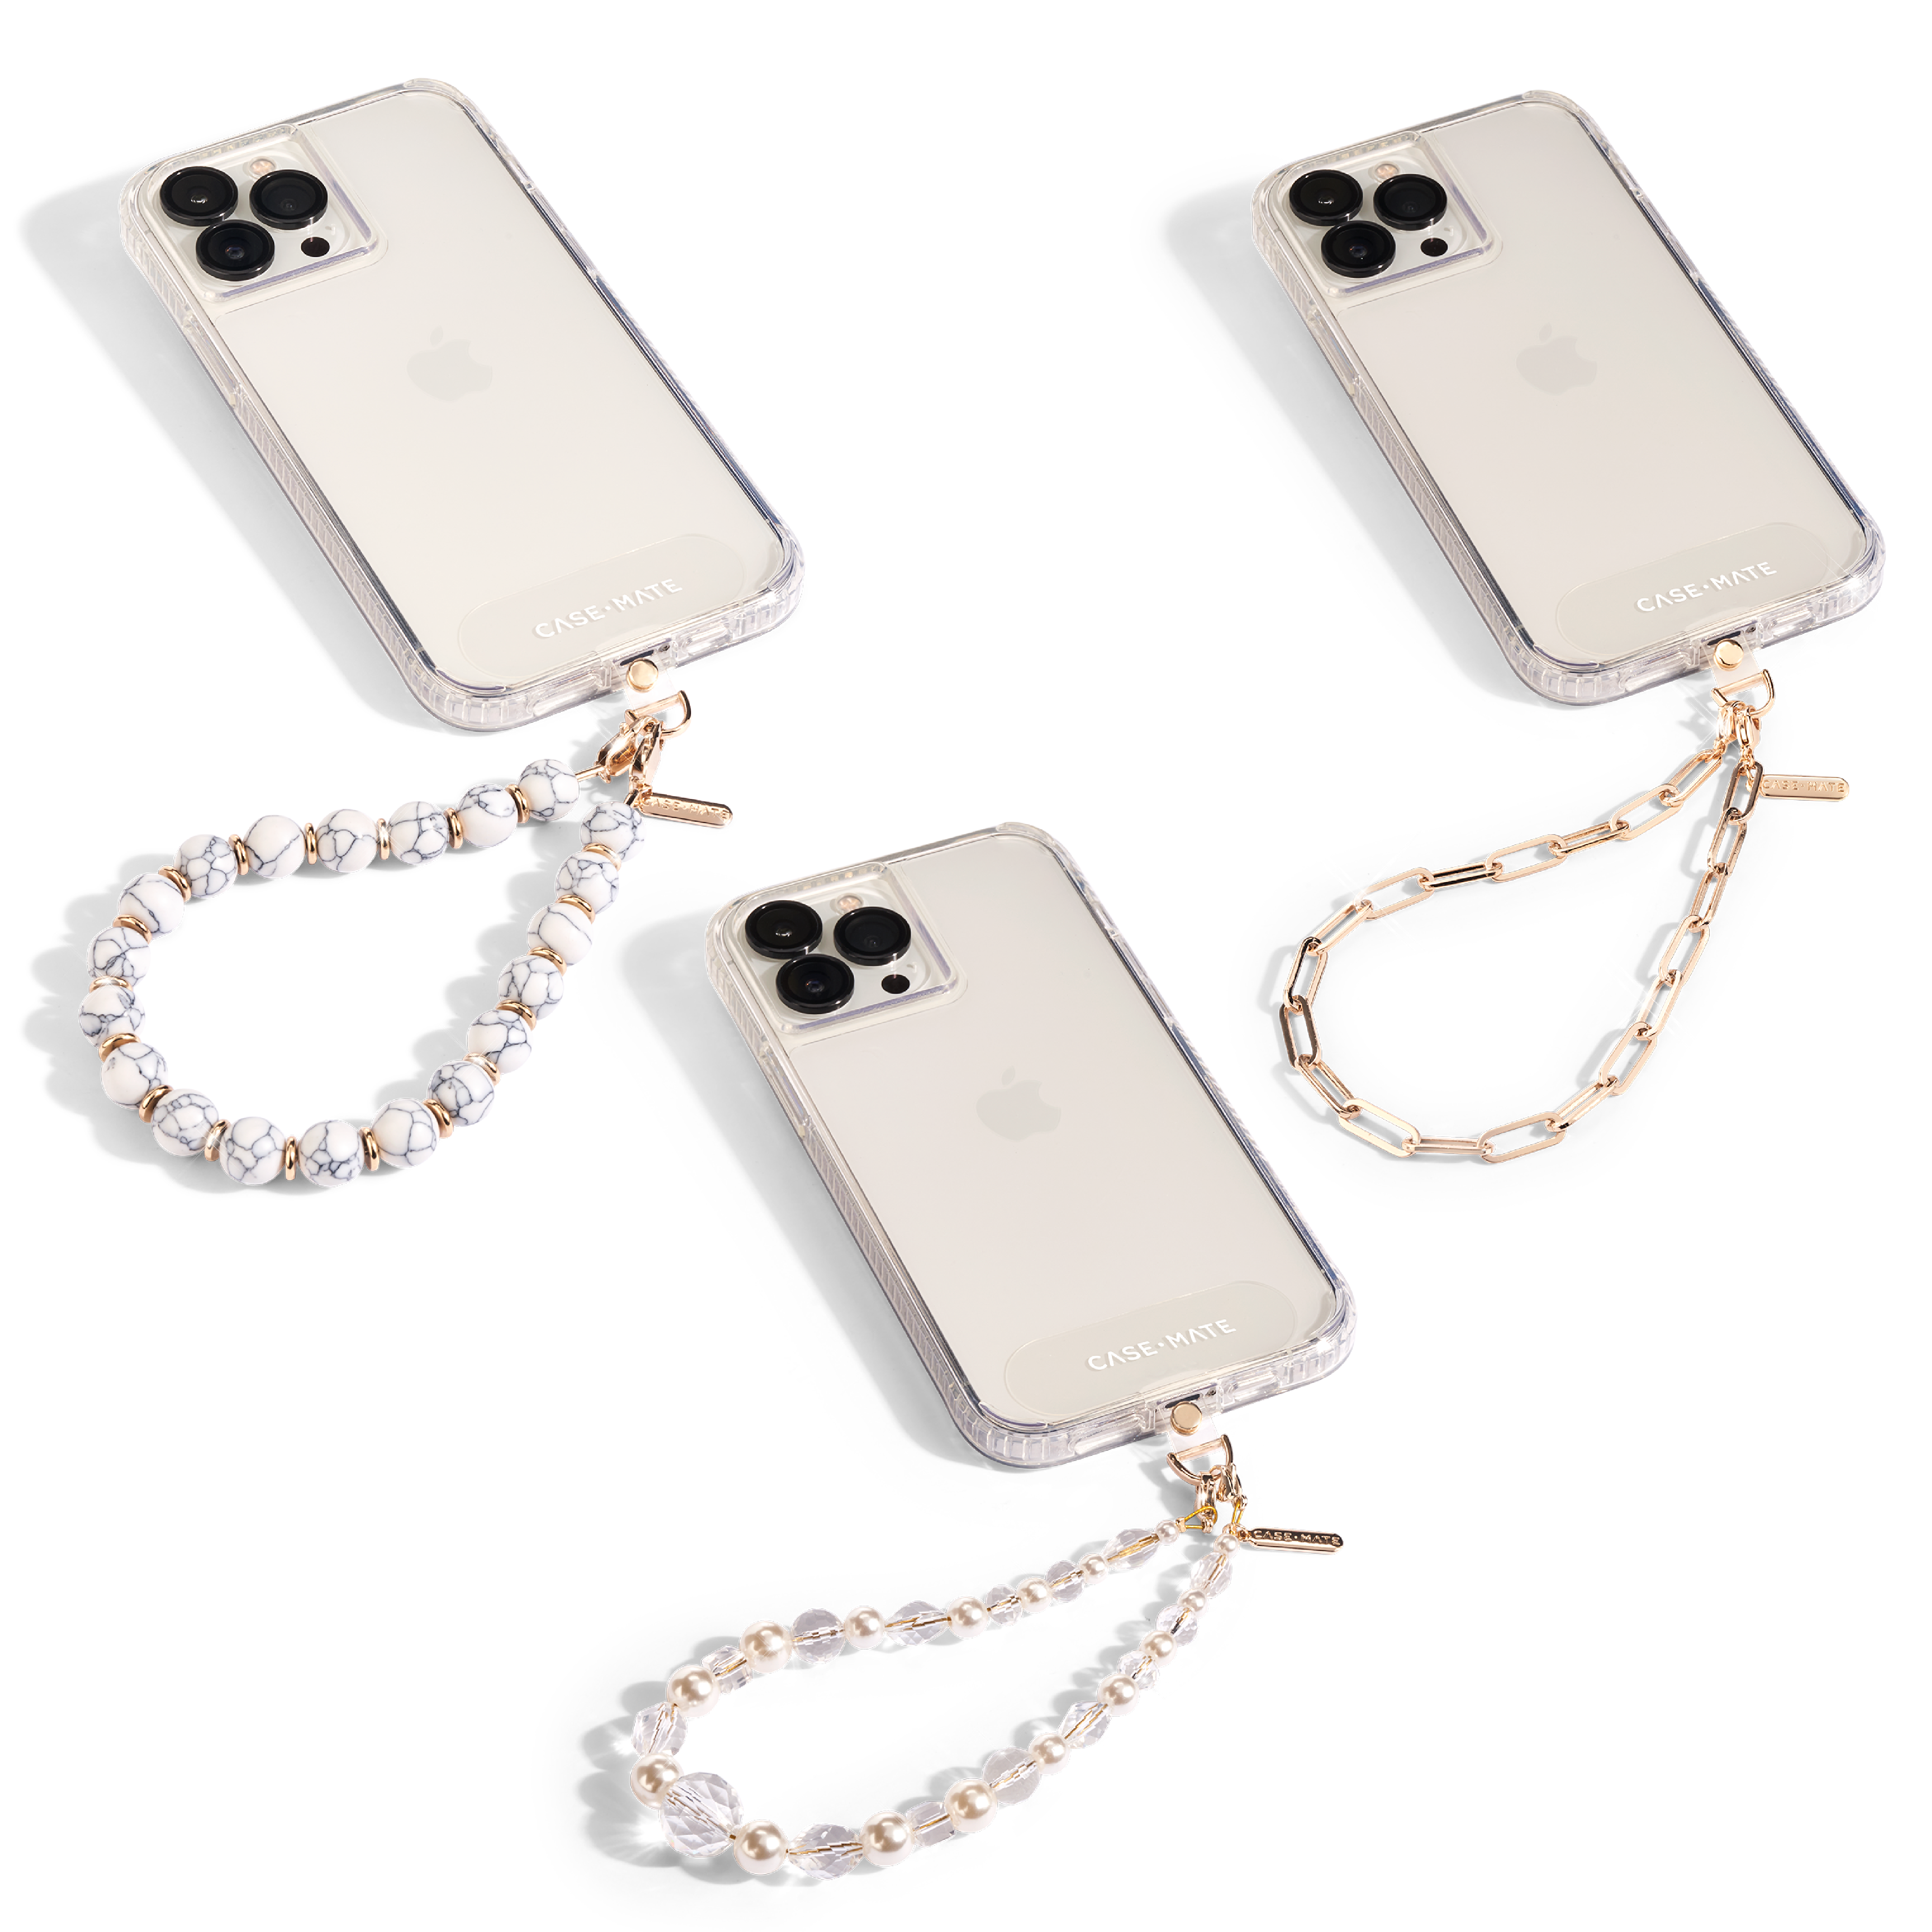 Wristlets 3 Pack (Crystal Pearl, Gold Chain, White Marble)